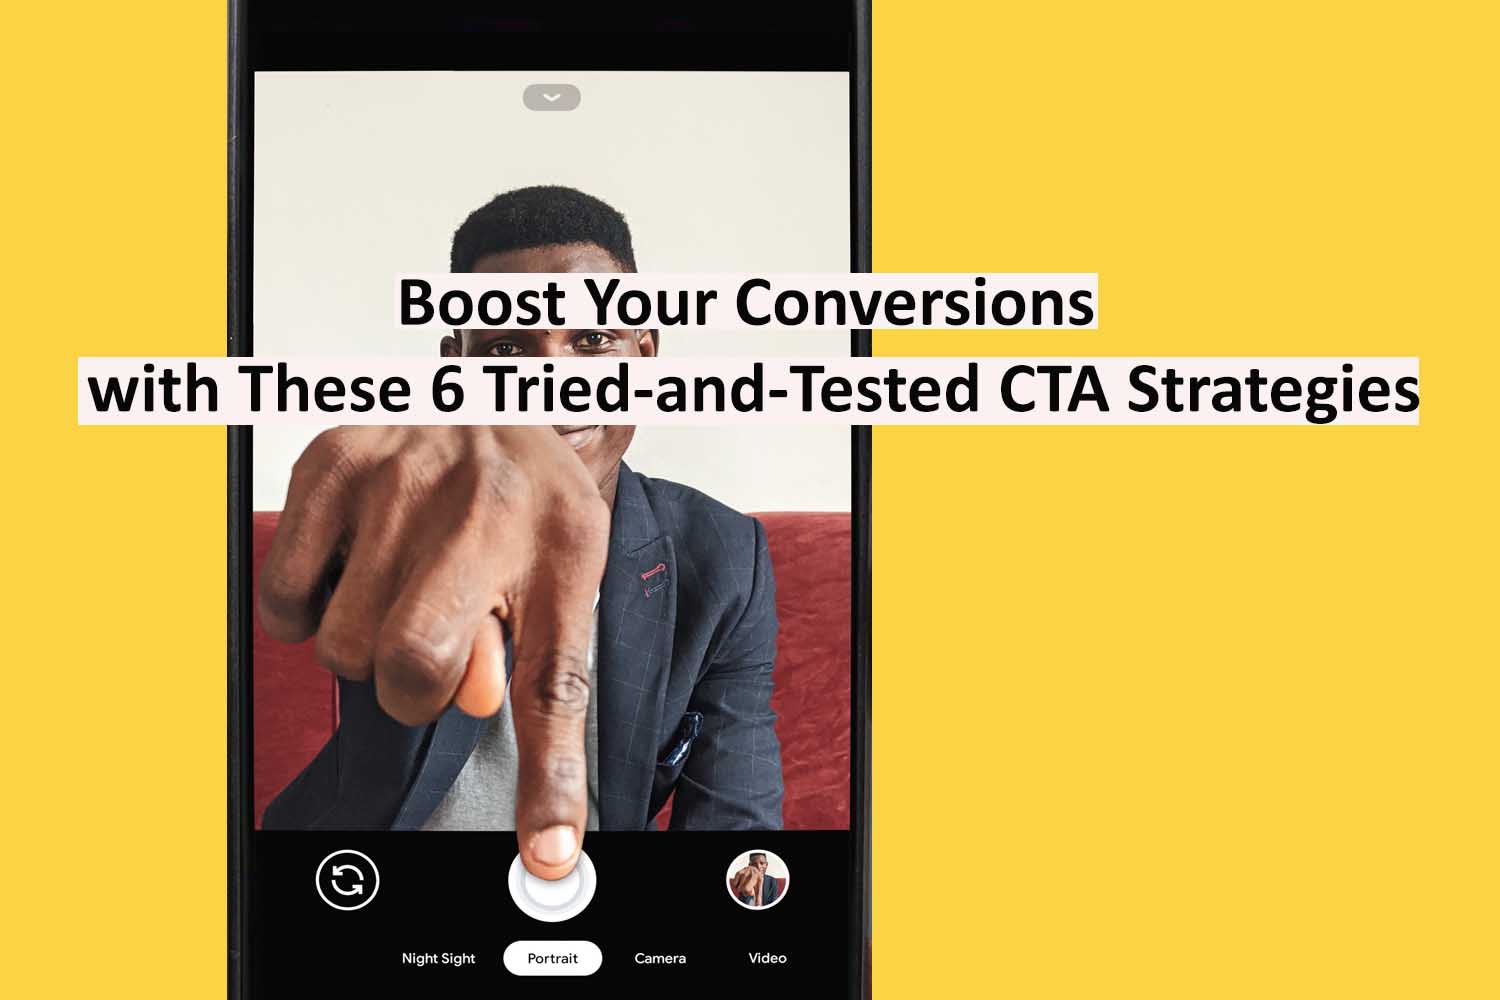 Boost Your Conversions with these CTA Strategies